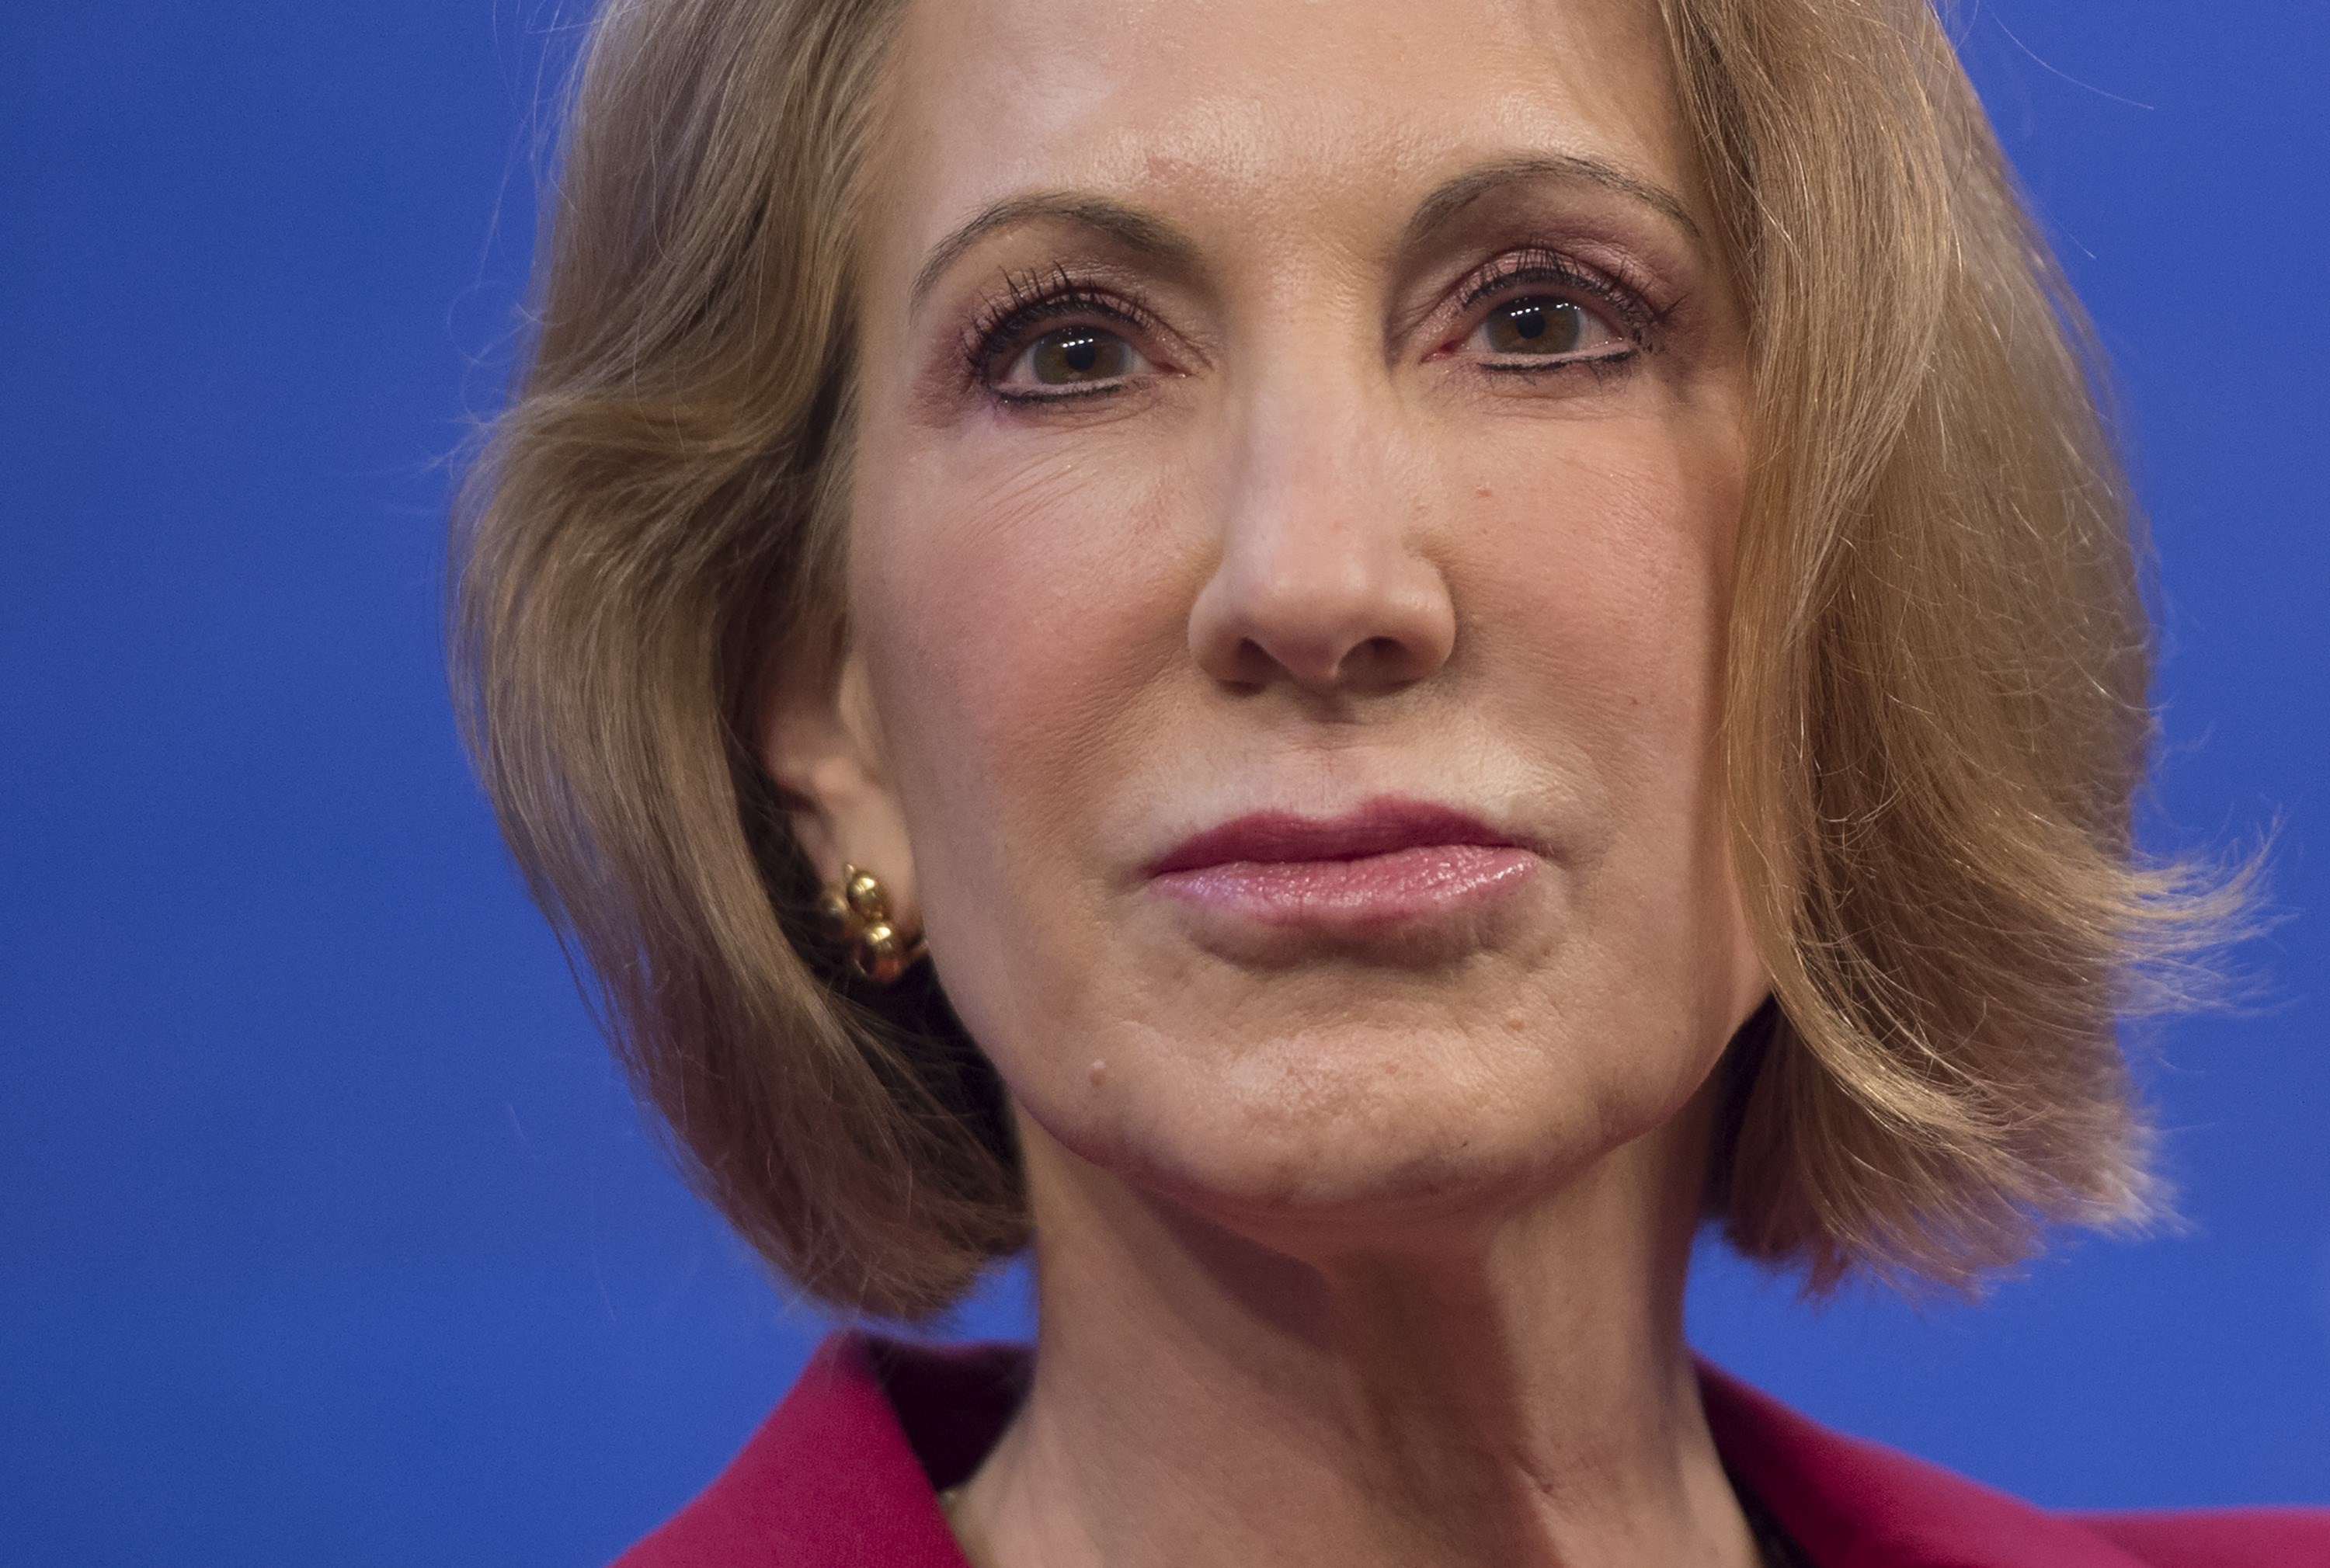 Carly Fiorina speaks about the economy at the Heritage Foundation on December 18, 2014. (SAUL LOEB—AFP/Getty Images)